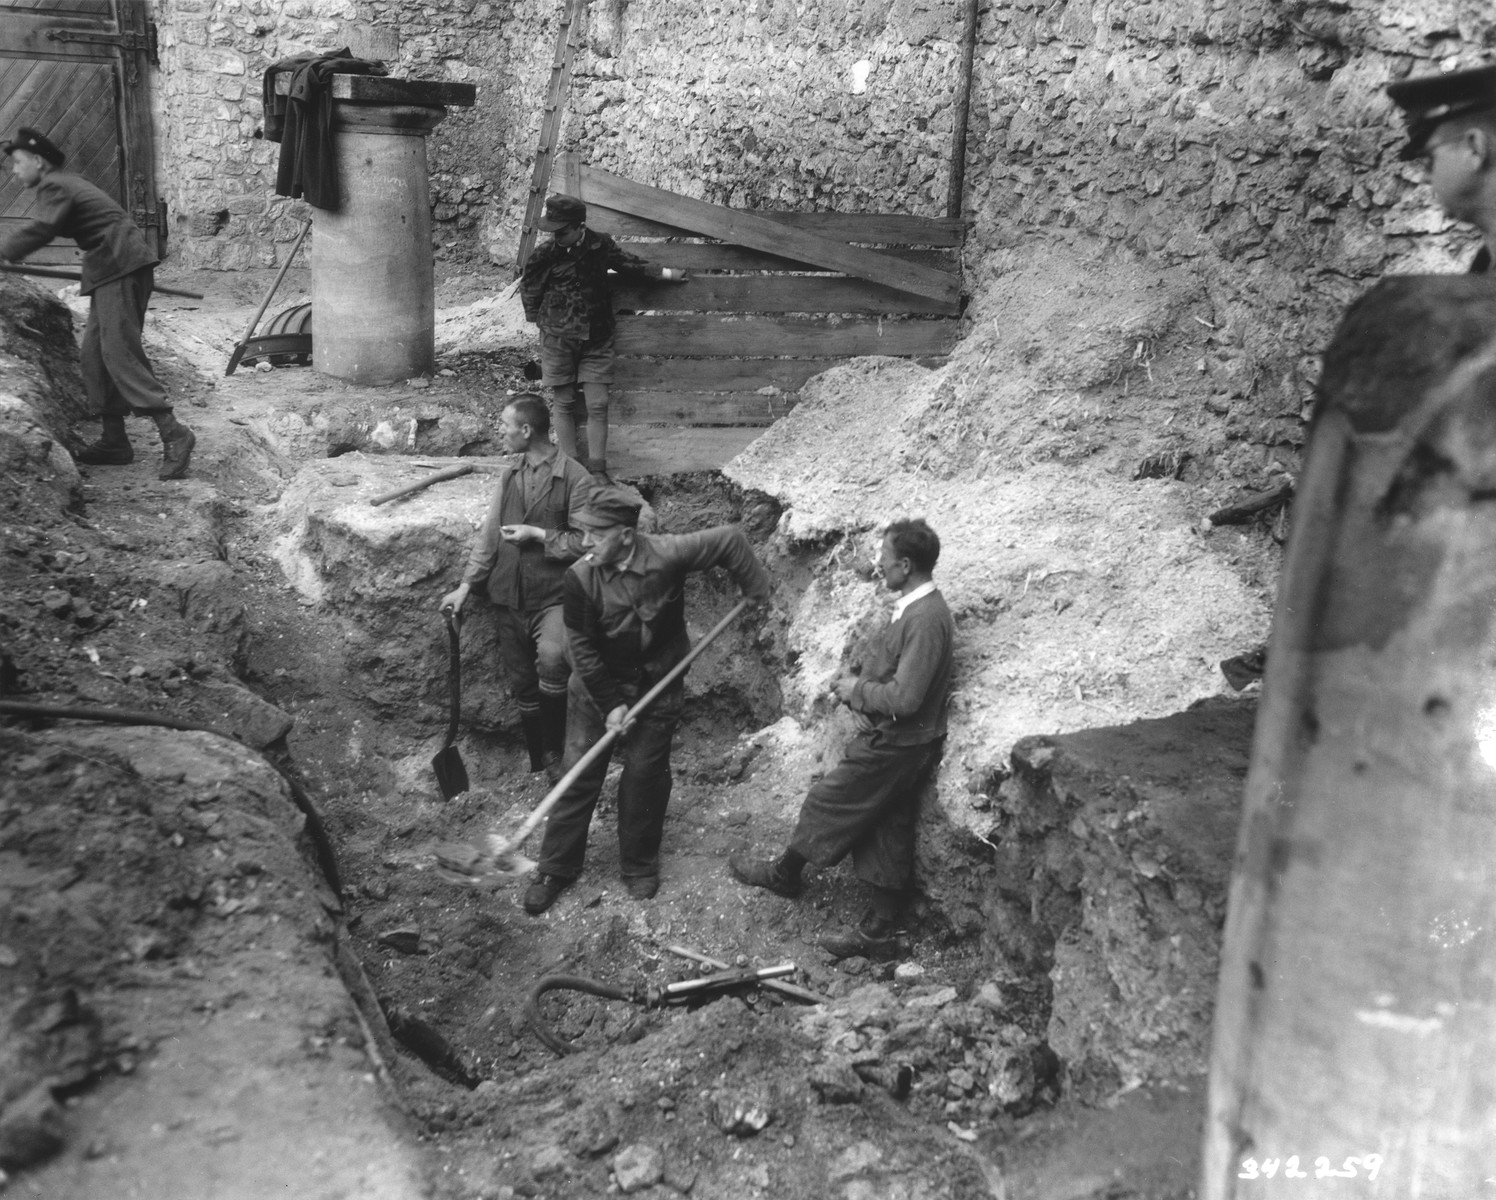 German laborers dig in the courtyard of the Veldenstein castle, formerly owned by Hermann Goering, in search of property looted by the Nazi regime.